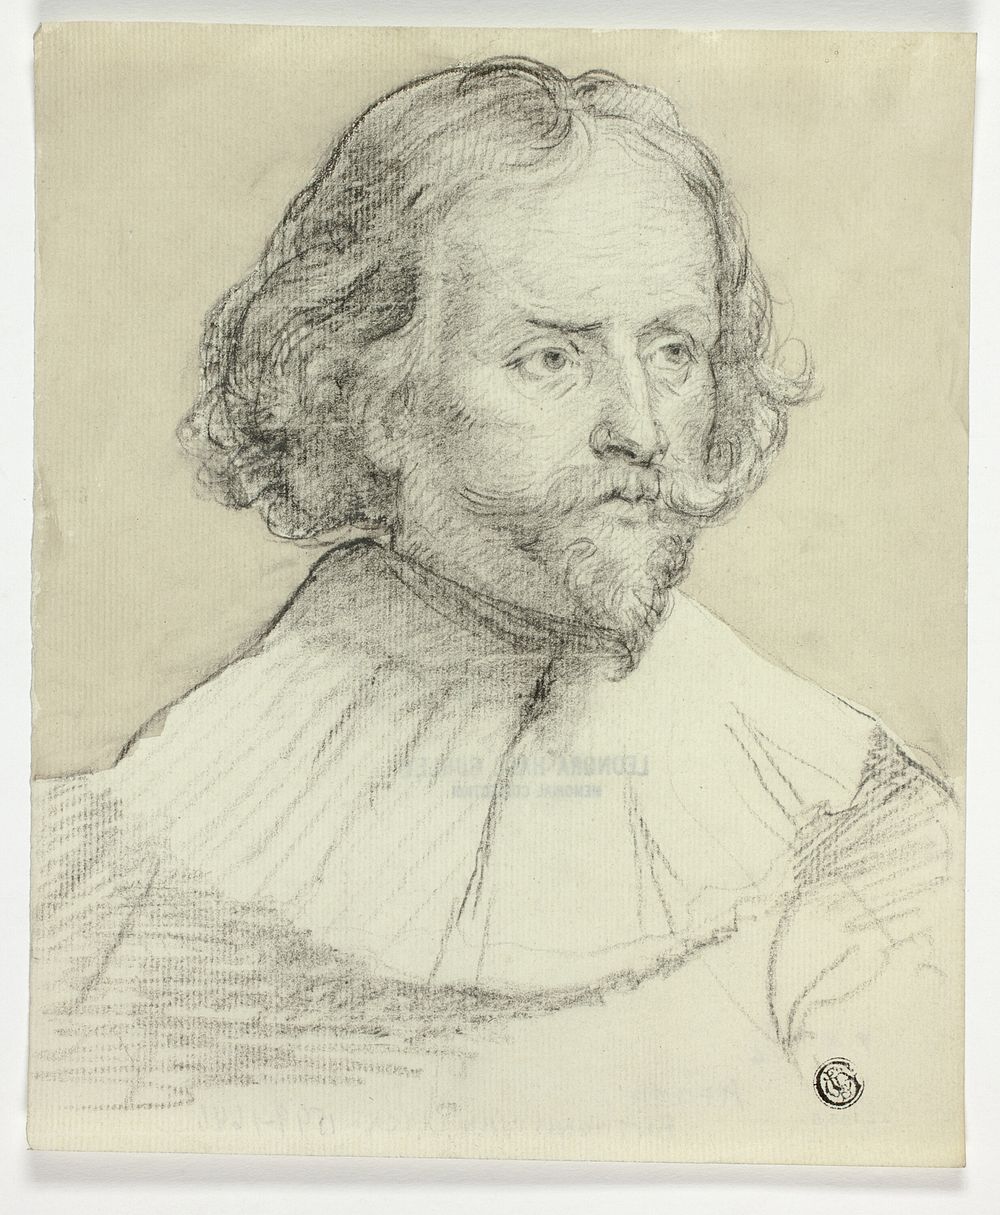 Quintijn Simons by Anthony van Dyck